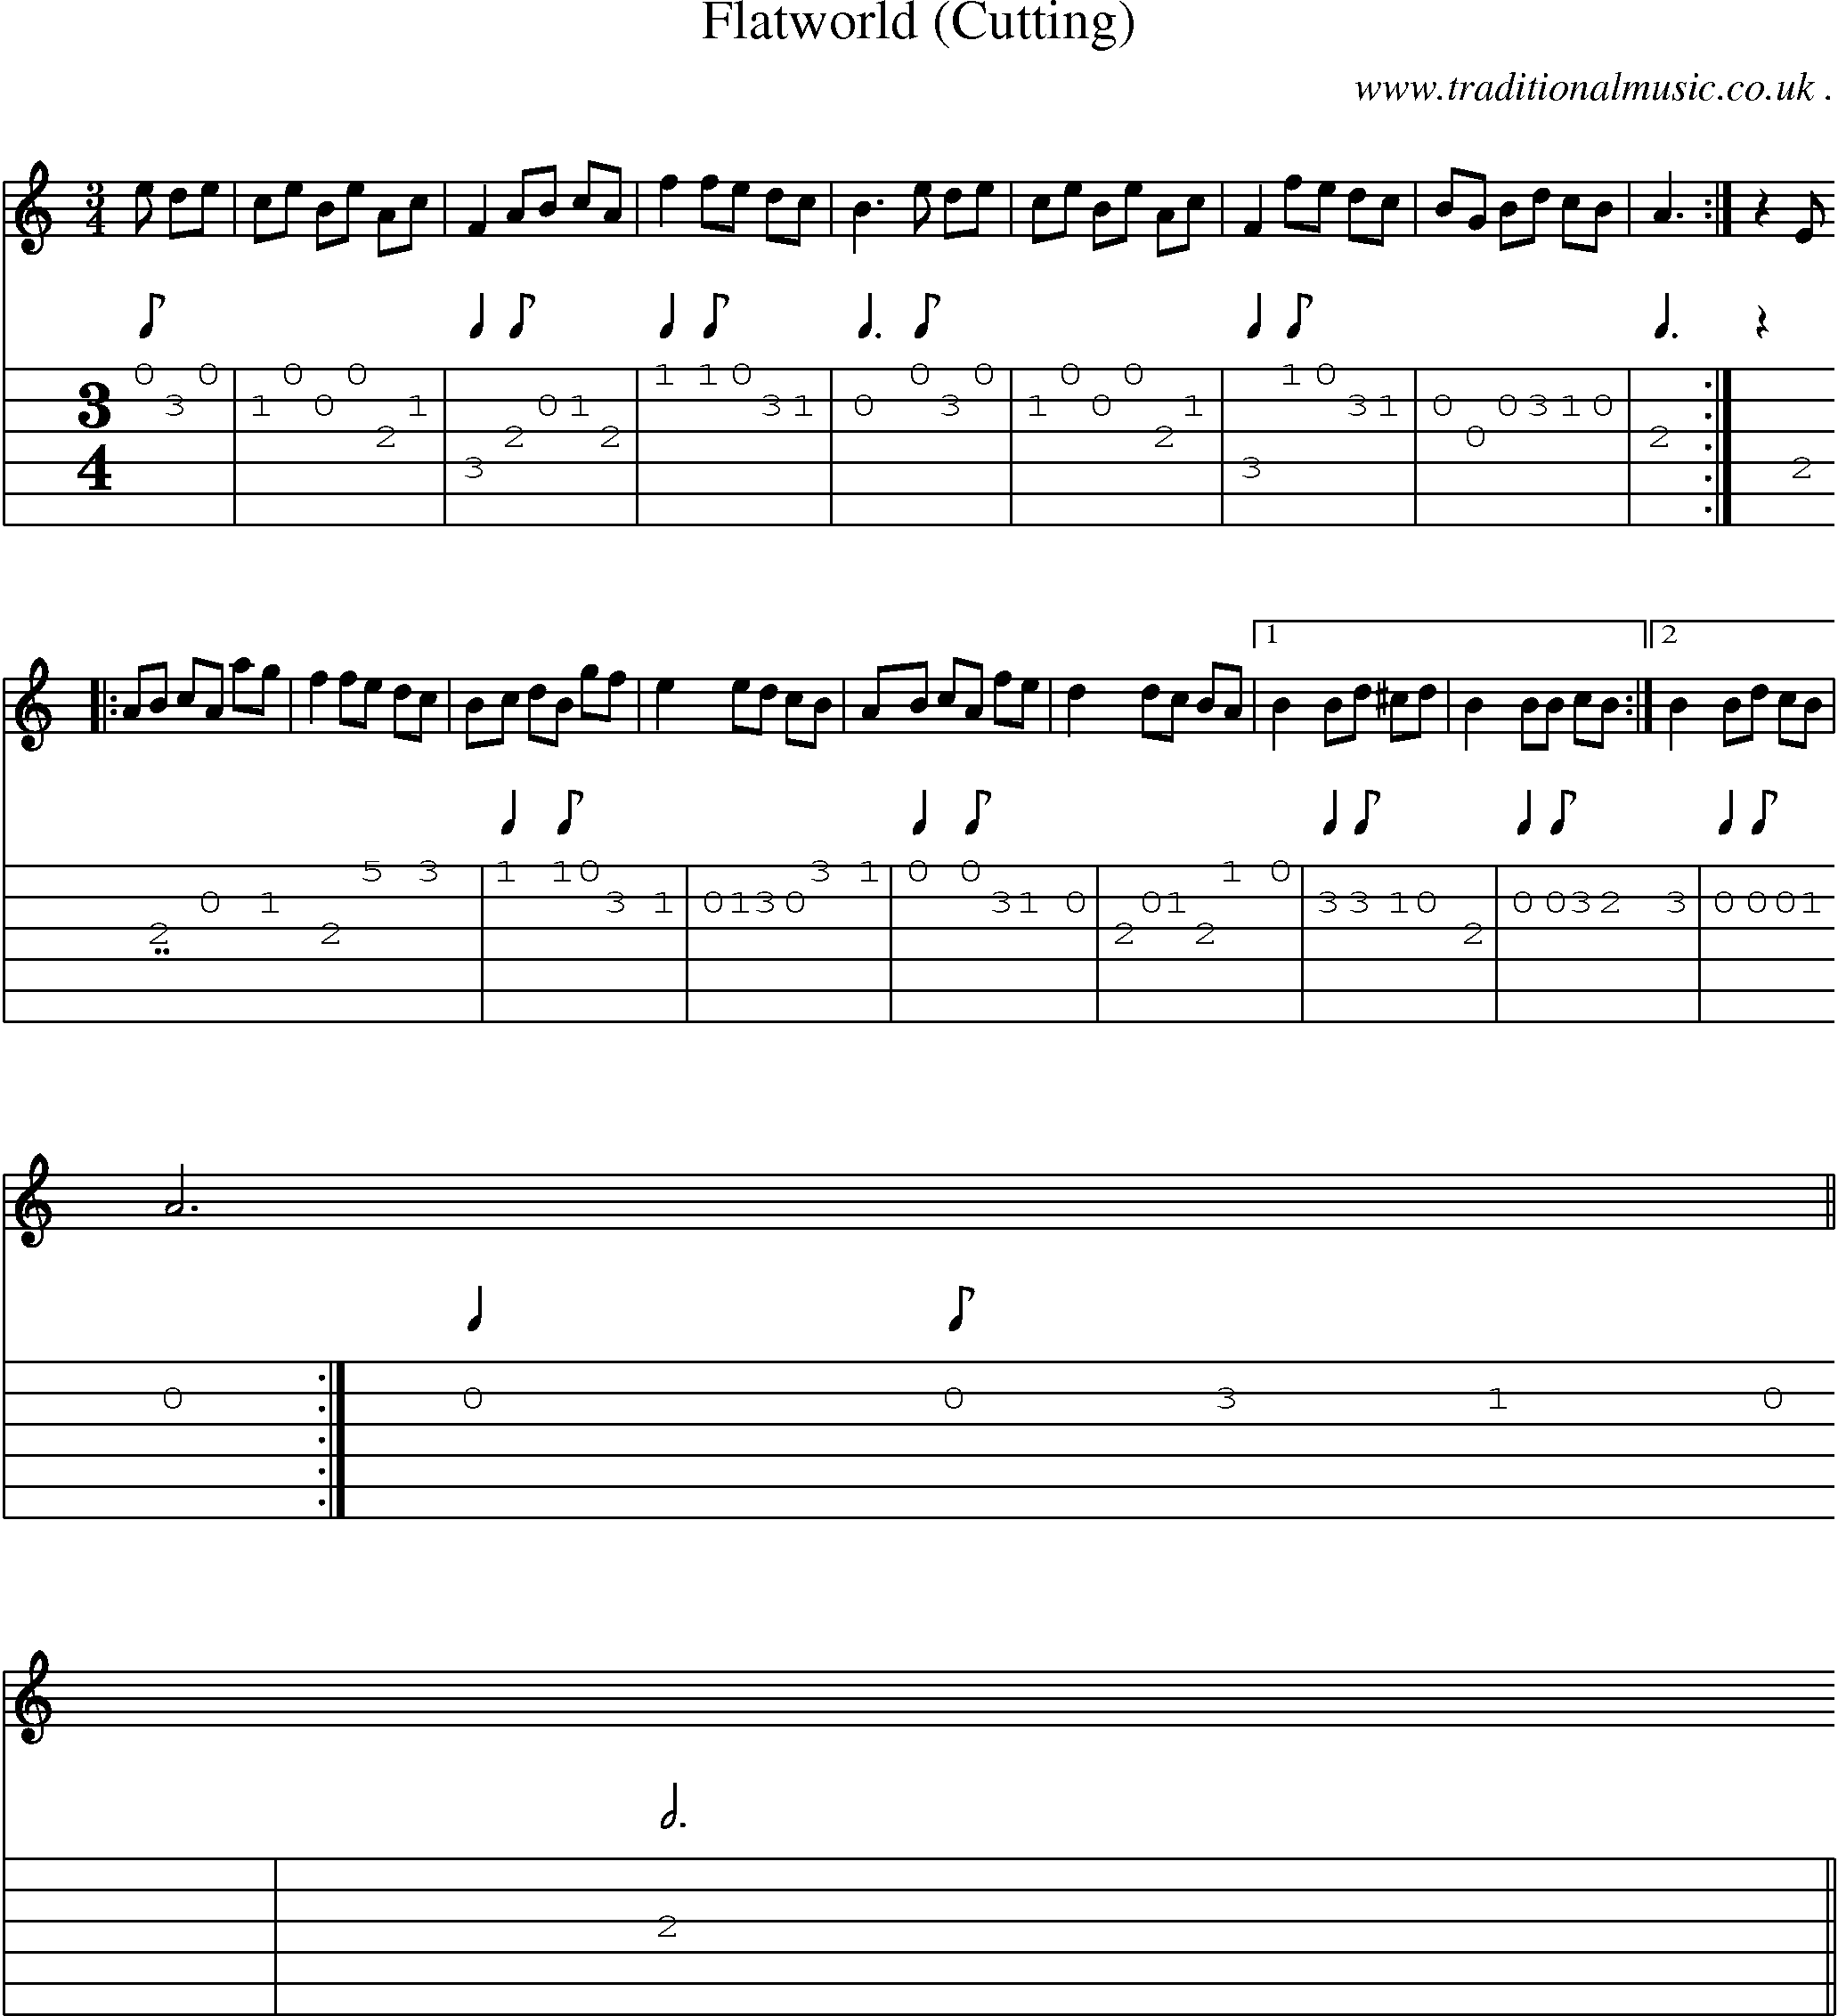 Sheet-Music and Guitar Tabs for Flatworld (cutting)